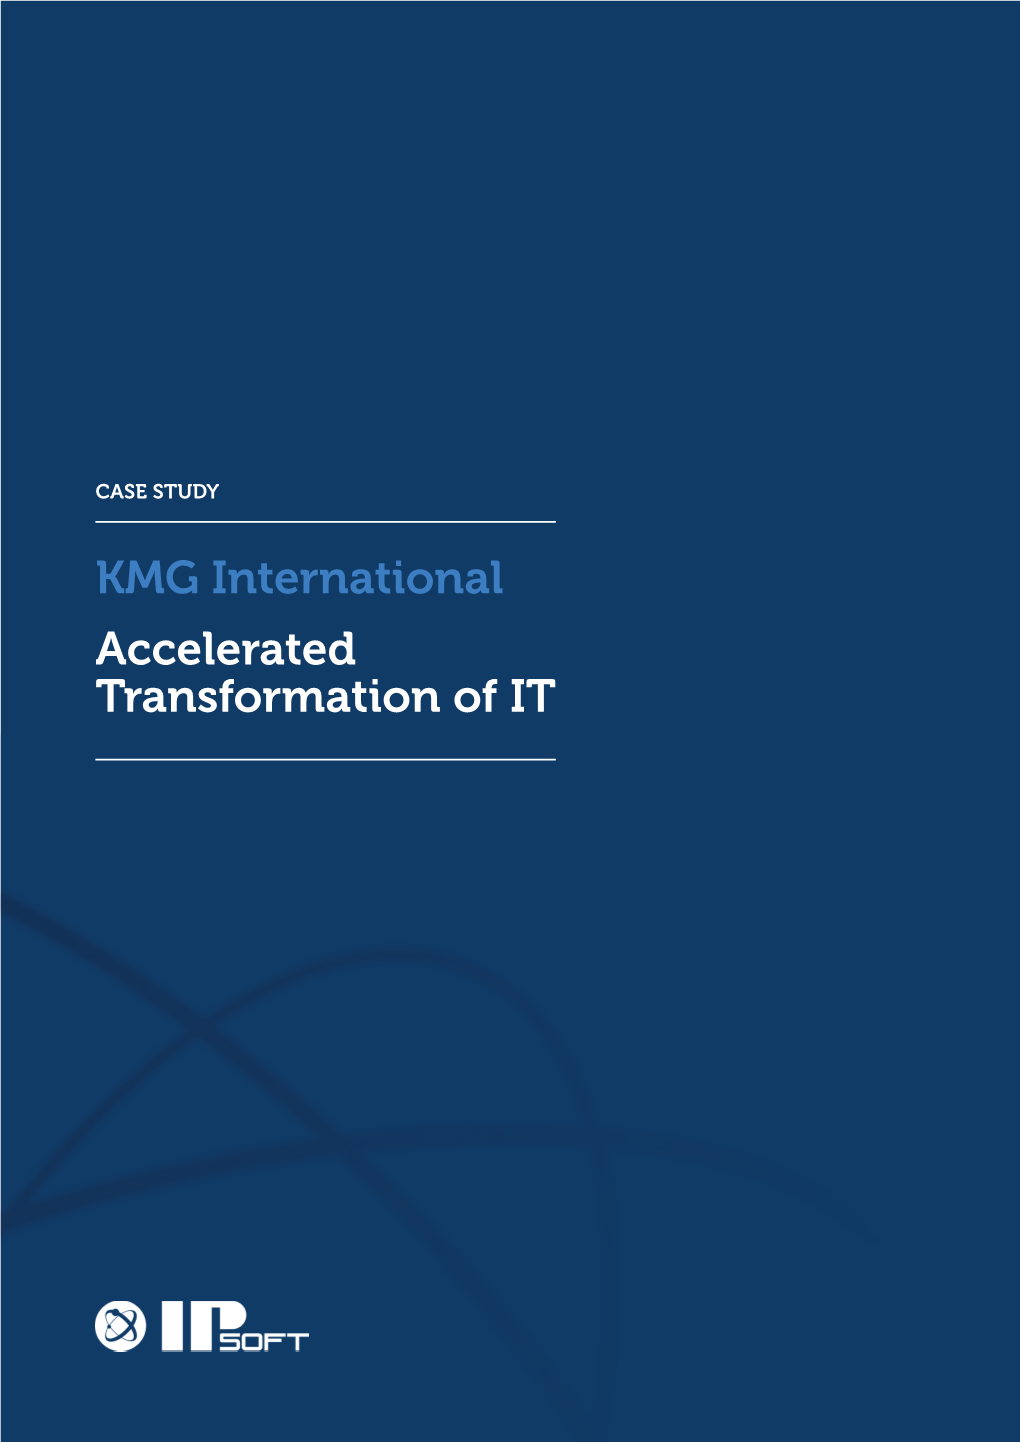 Accelerated Transformation of IT KMG International